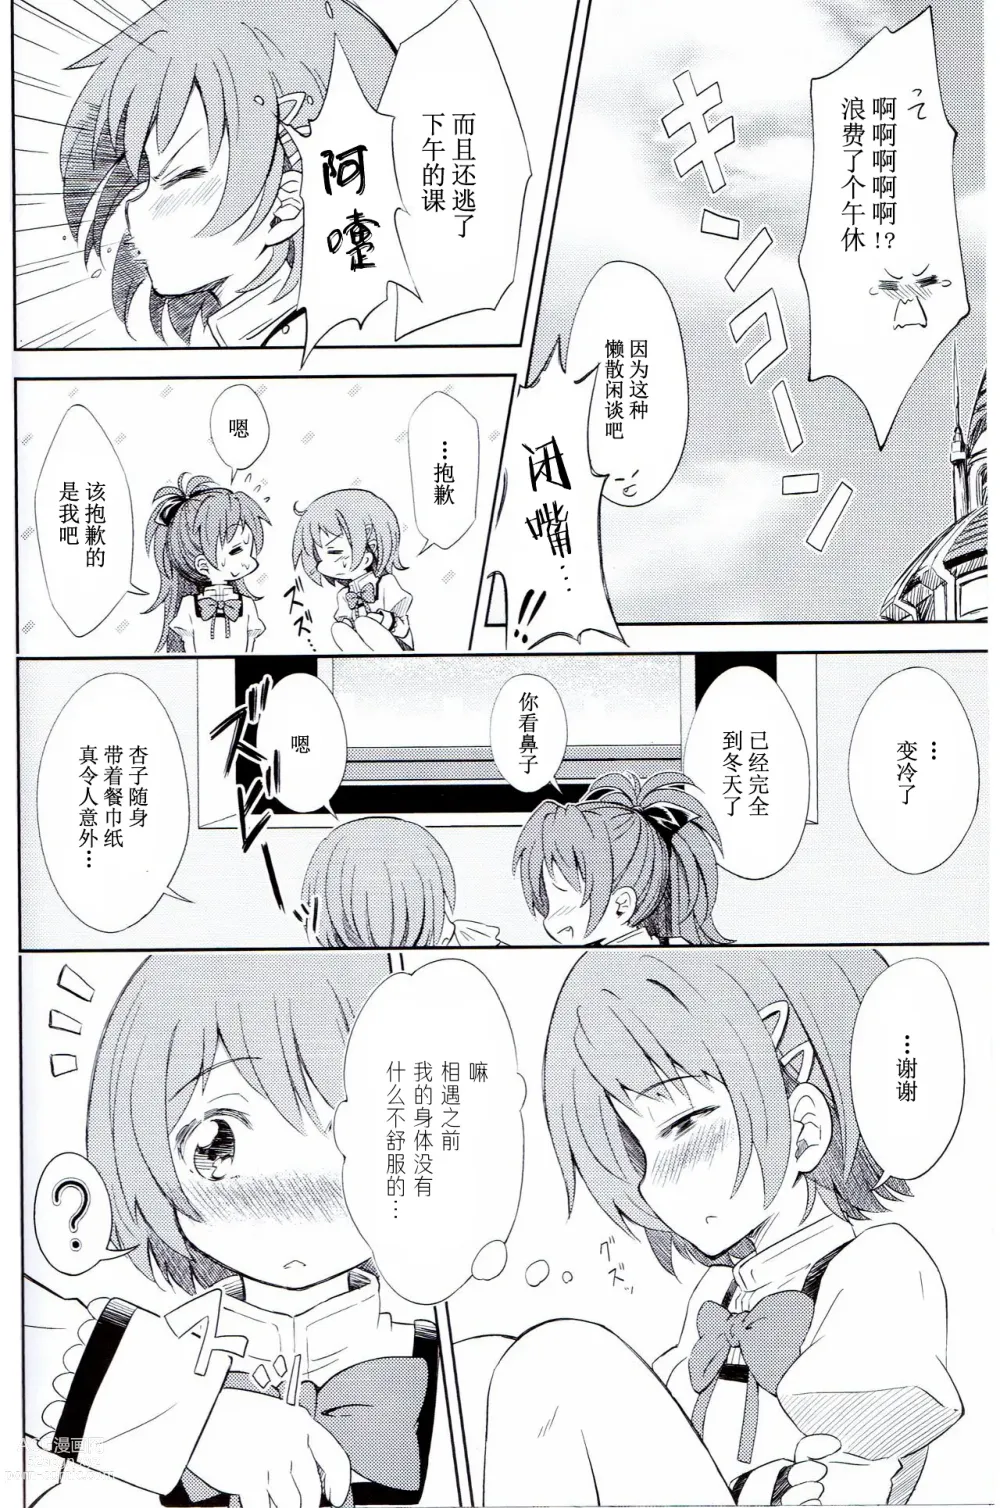 Page 9 of doujinshi Lovely Girls Lily vol. 5